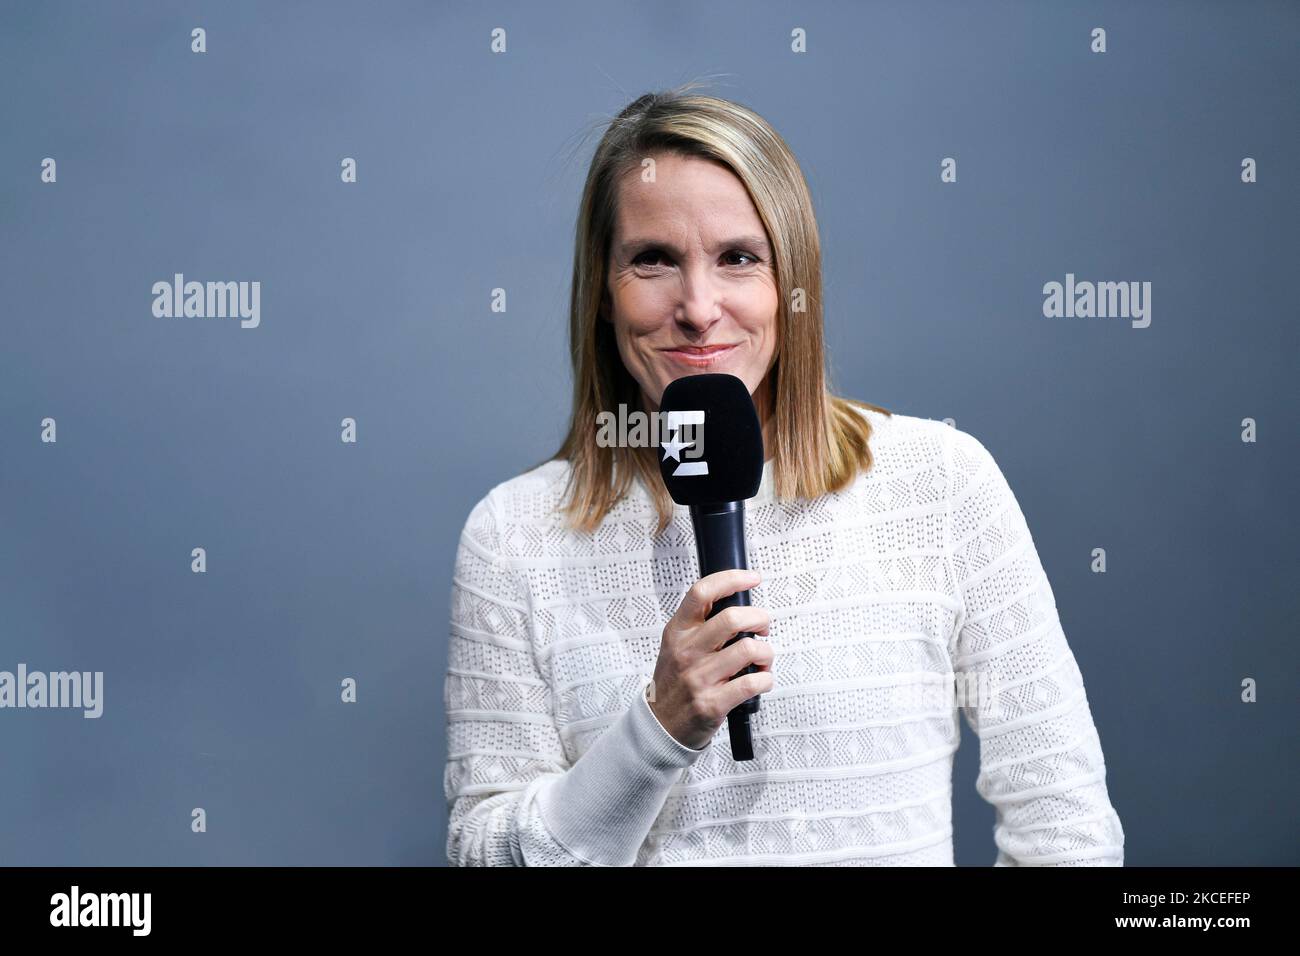 Justine Henin, consultant for the television TV channel Eurosport during the Rolex Paris Masters, ATP Masters 1000 tennis tournament, on November 4, 2022 at Accor Arena in Paris, France